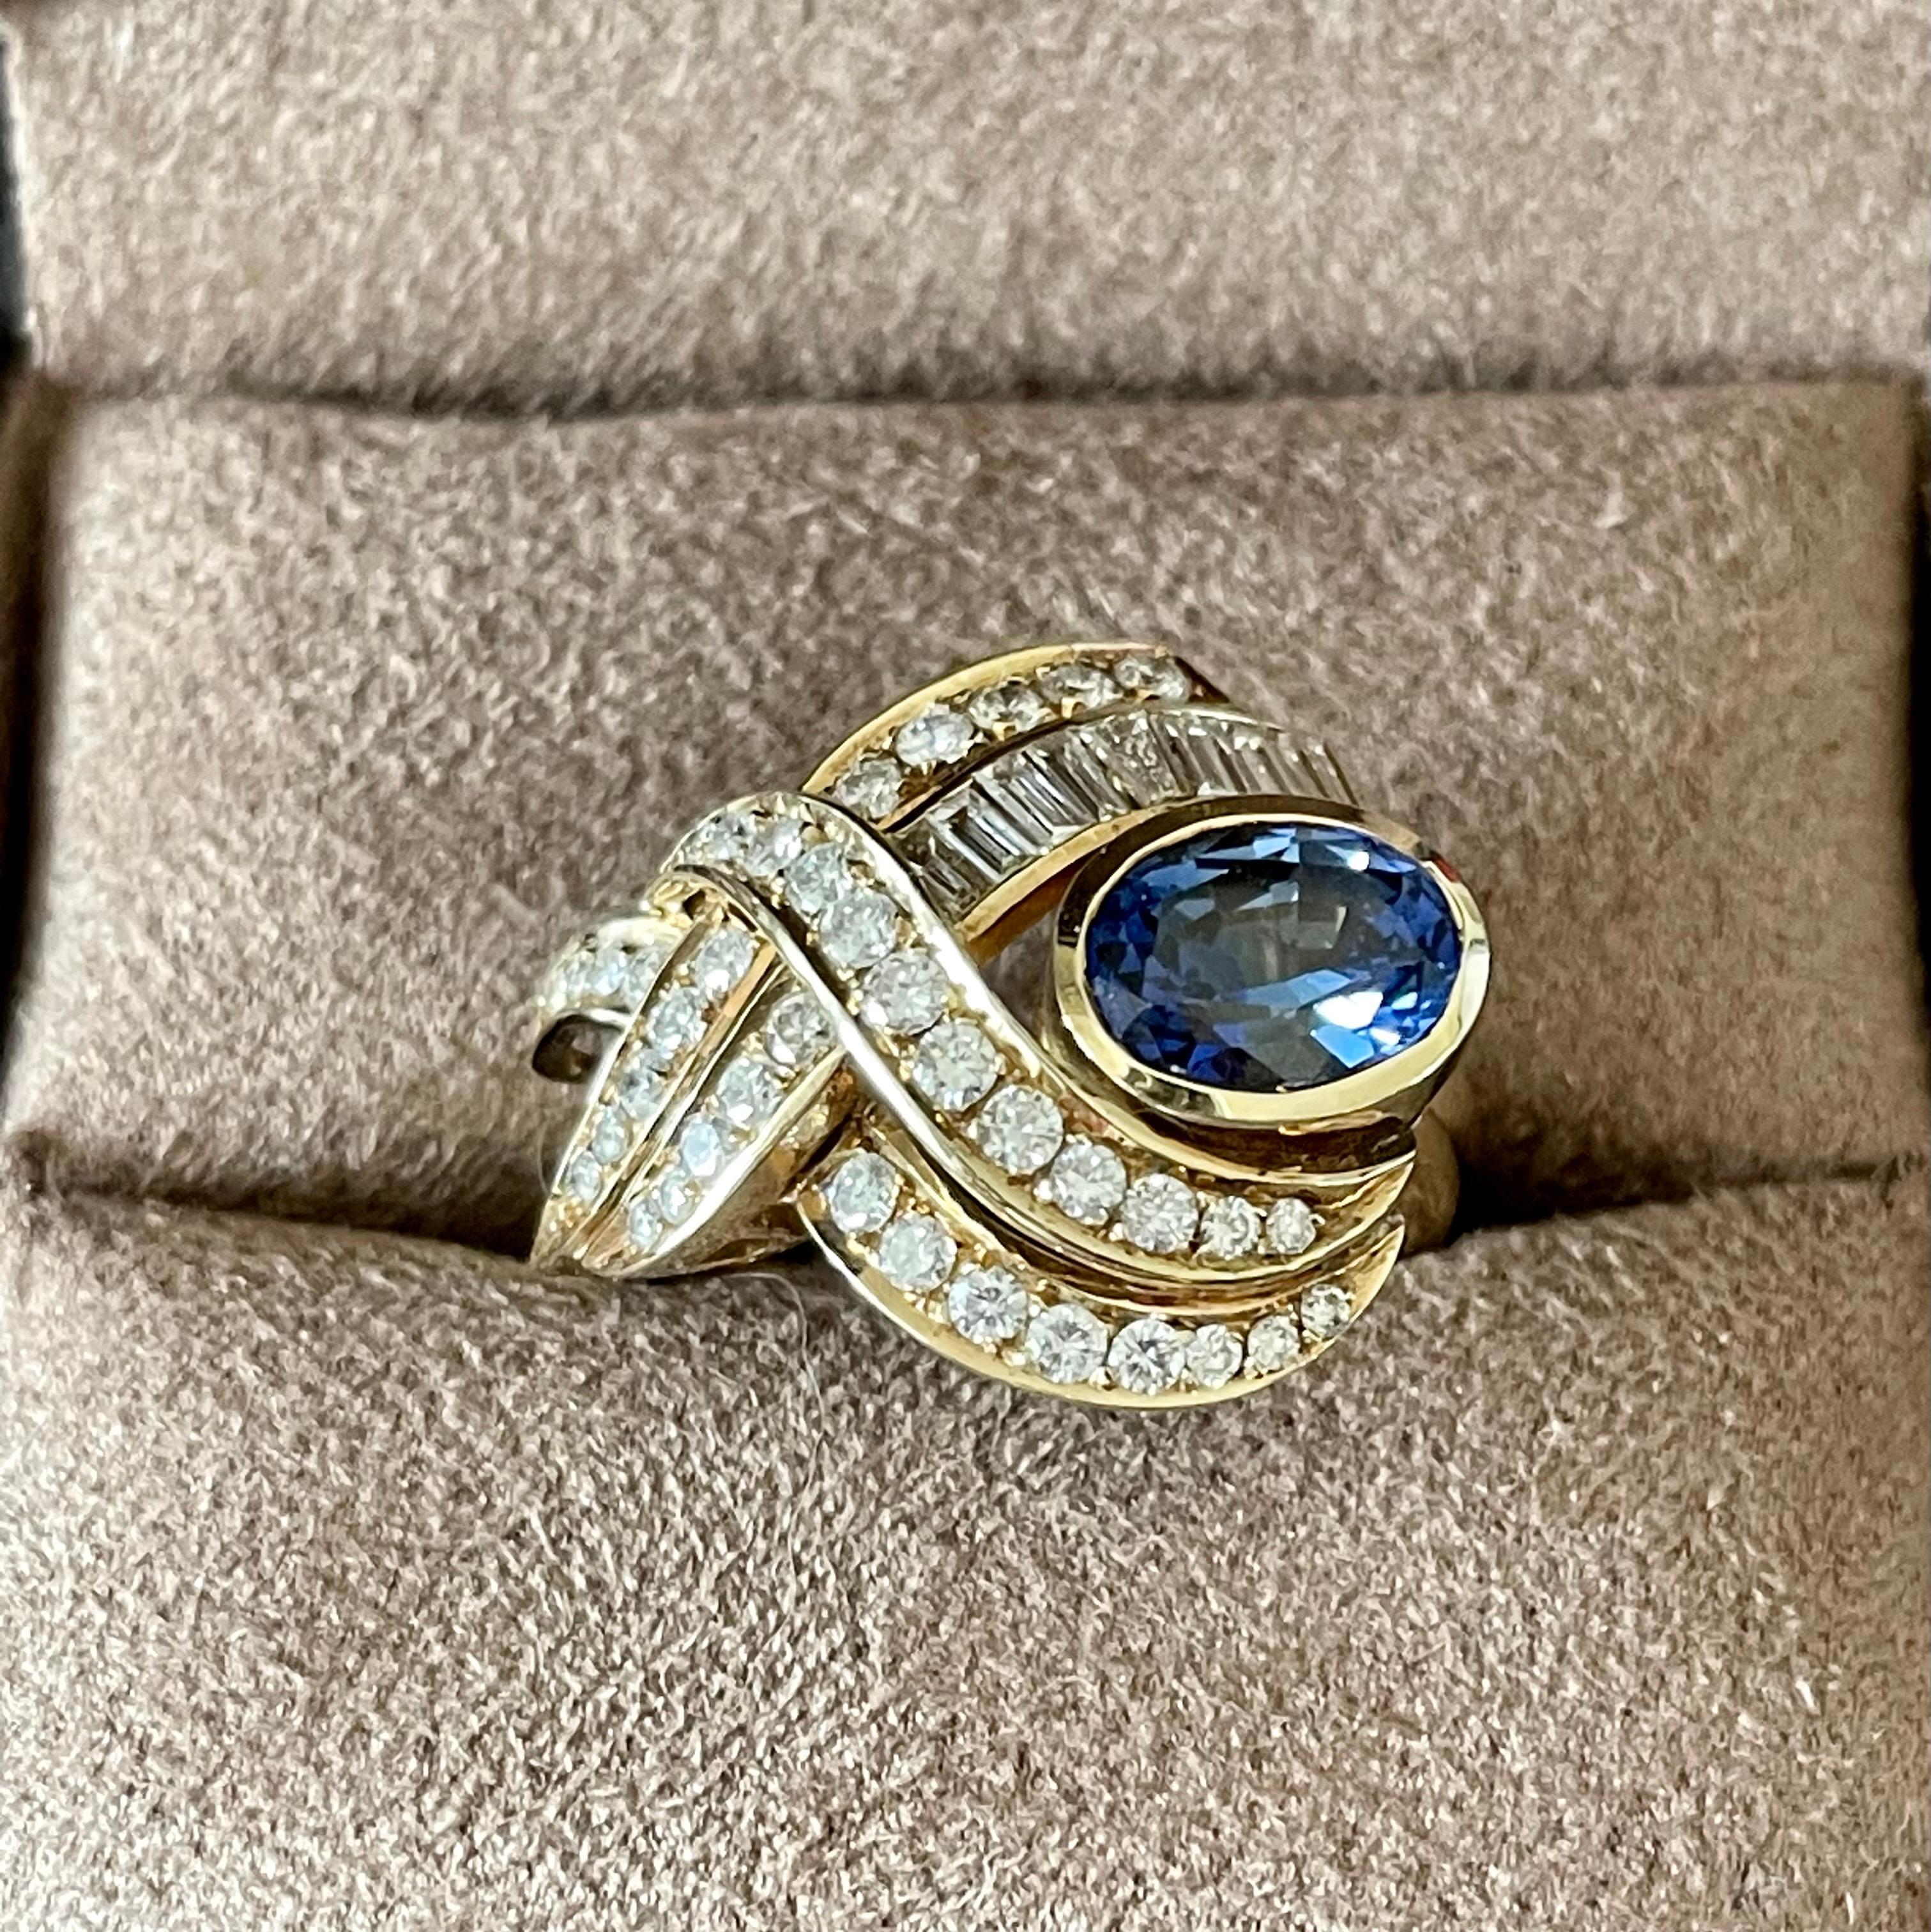 Captivating cockatail Ring in 14 K yellow Gold featuring a lovely blue oval Sapphire weighing approximately 1.80 ct framed by Baguette and bBrilliant cut Diamonds weighing approximately 2 ct. 
The ring is currently size 54 ( US size 7) but can